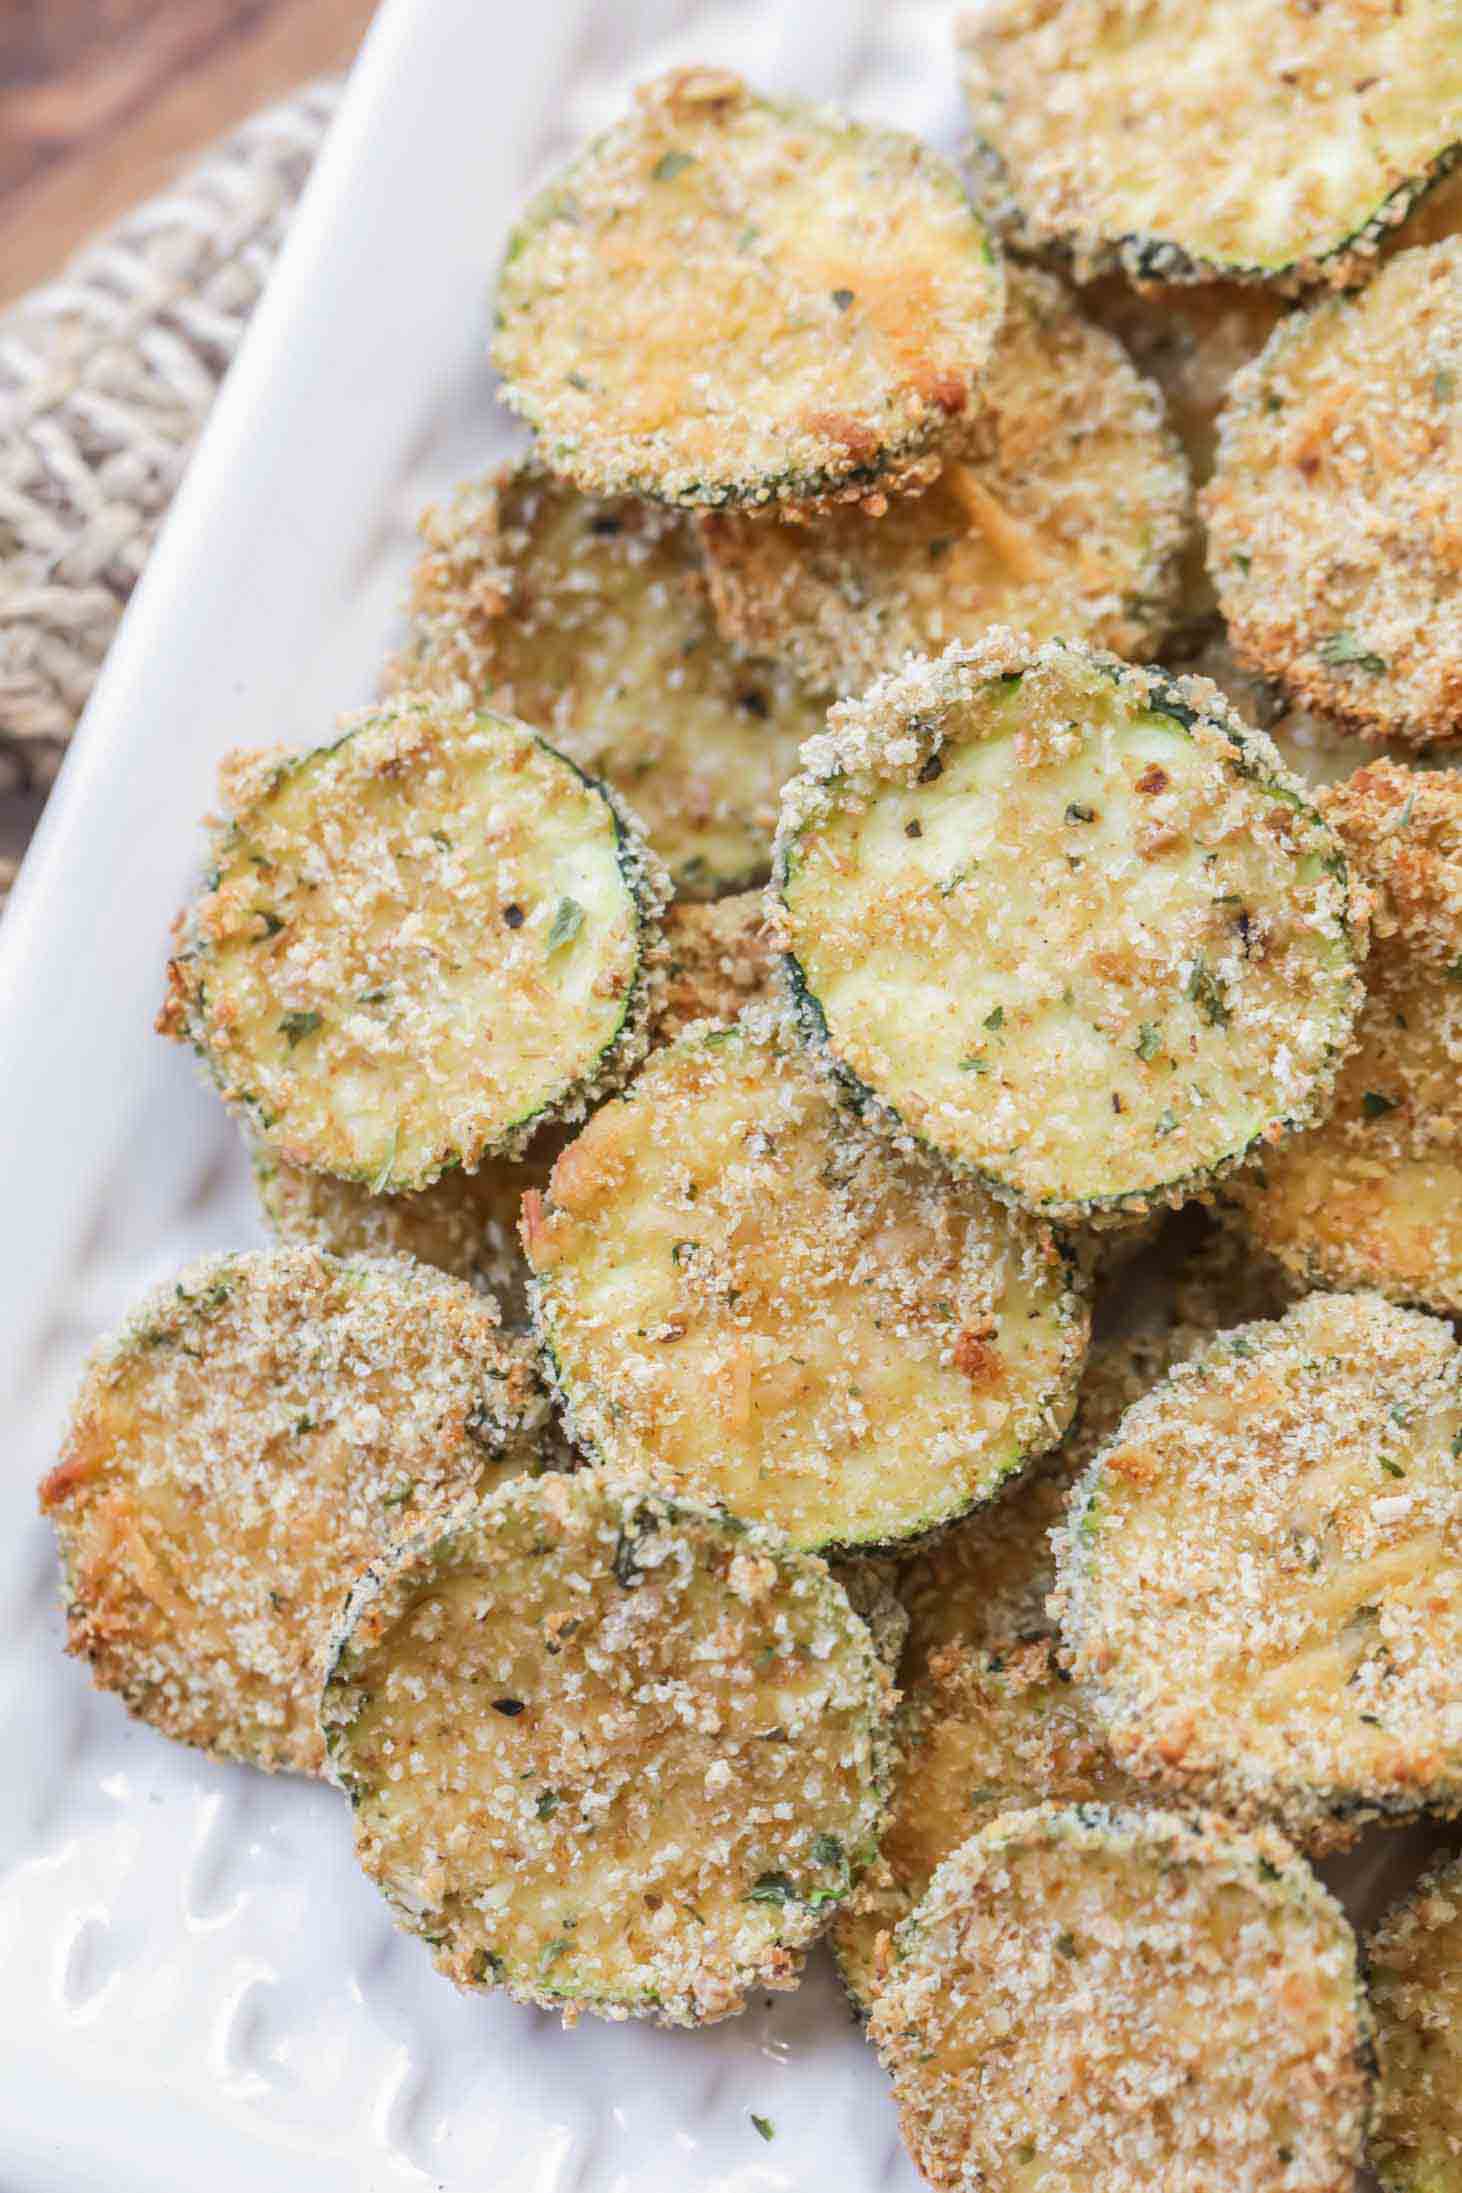 Serve crock pot mac and cheese with baked zucchini chips.